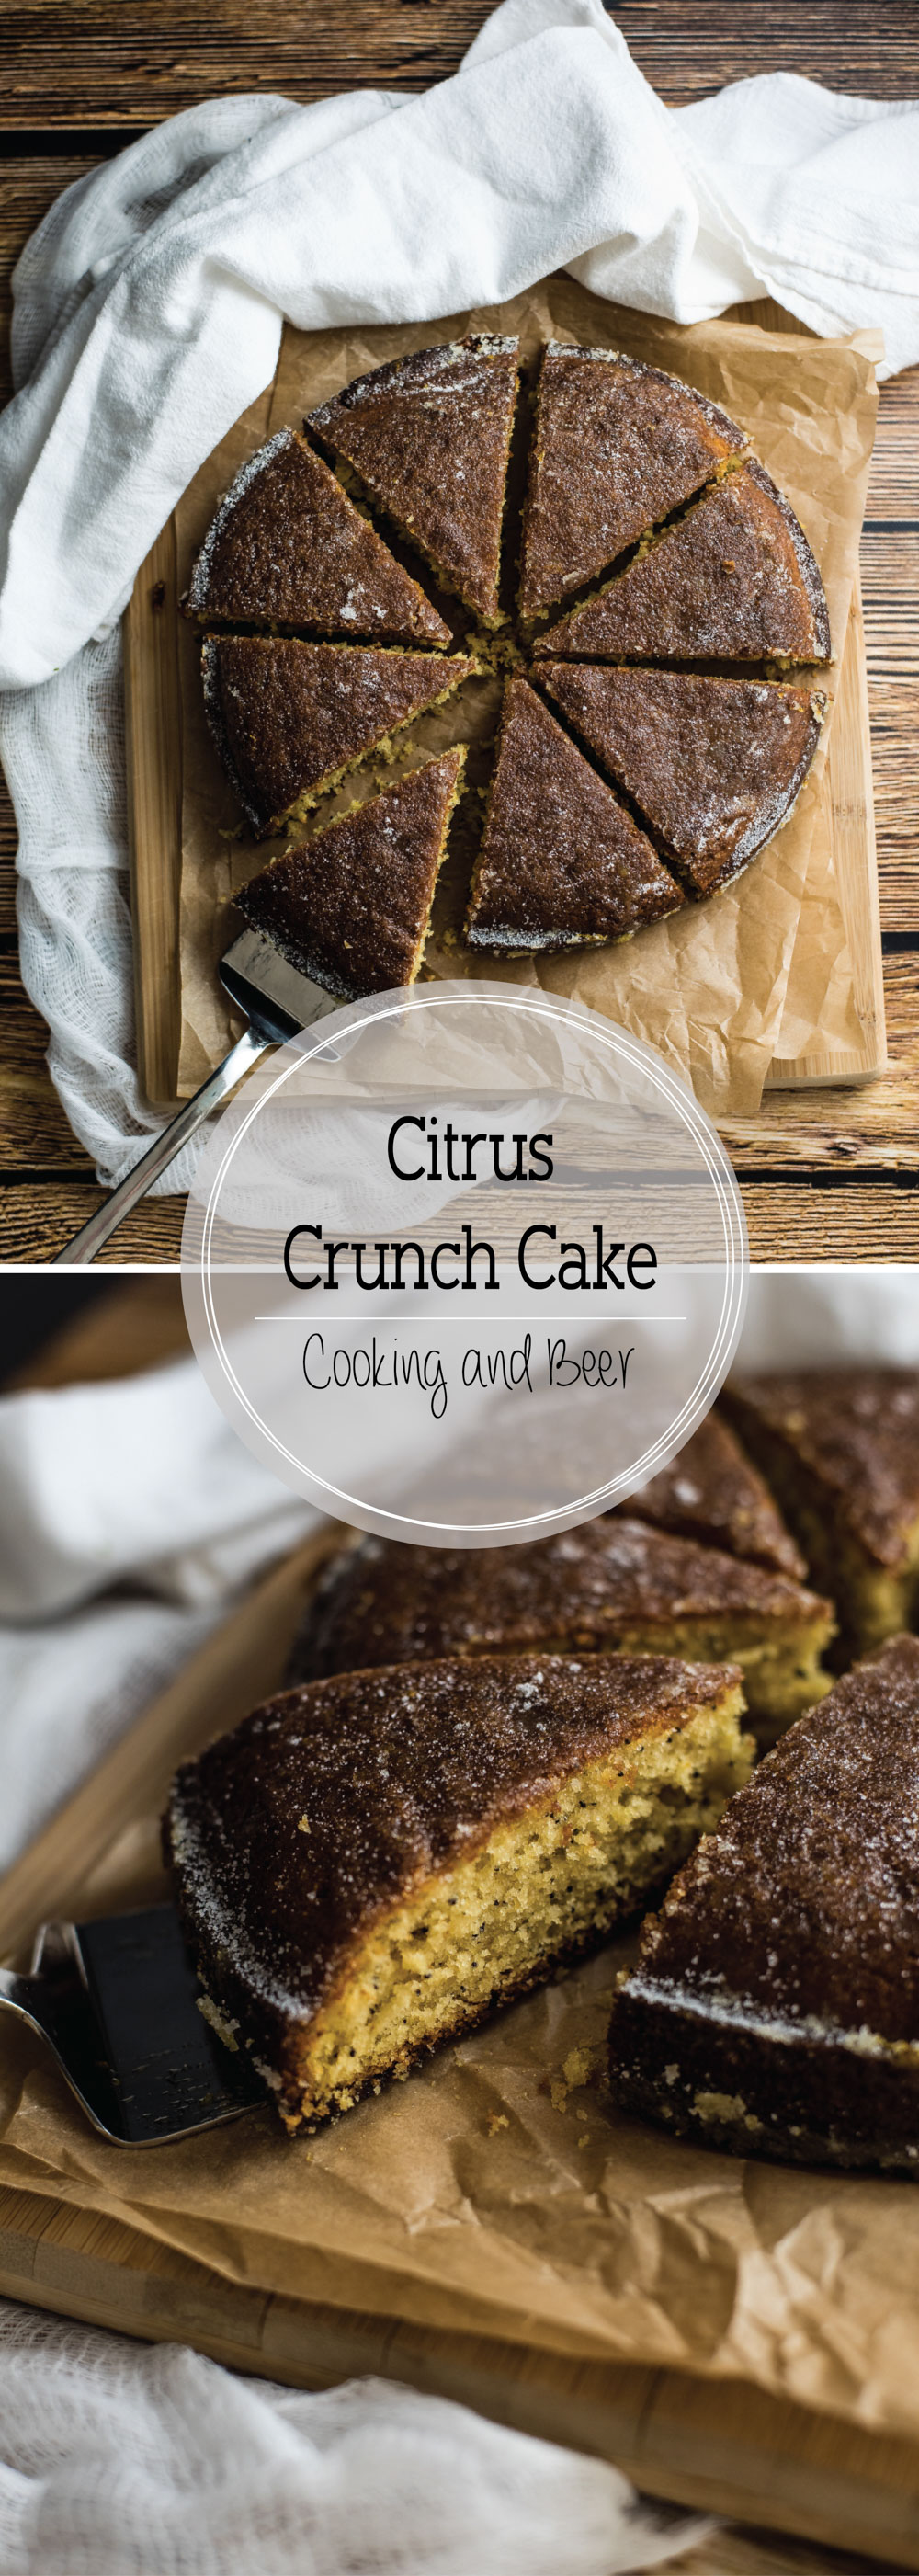 Citrus crunch cake is the perfect autumn dessert. It resembles coffee cake, but has the most amazing sugared crunchy topping!